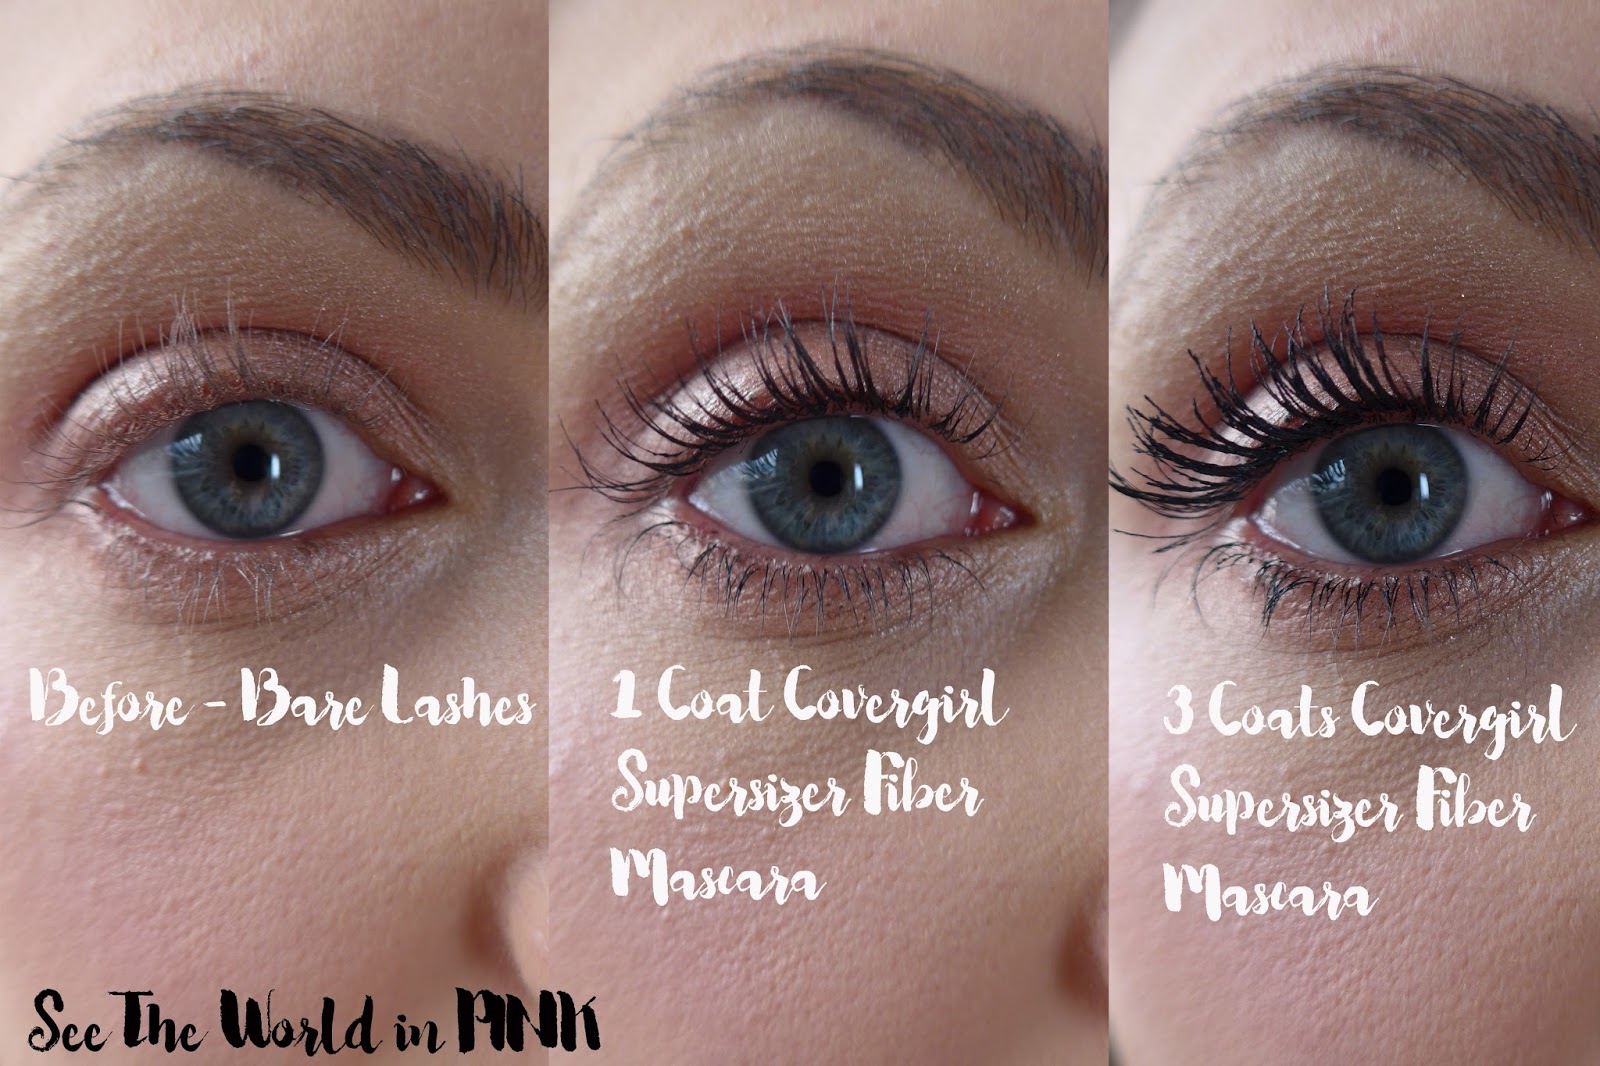 Covergirl "The Super Sizer Fiber" Mascara and Covergirl "Clean Matte BB Cream" Review and Swatches - BzzAgent Campaign 